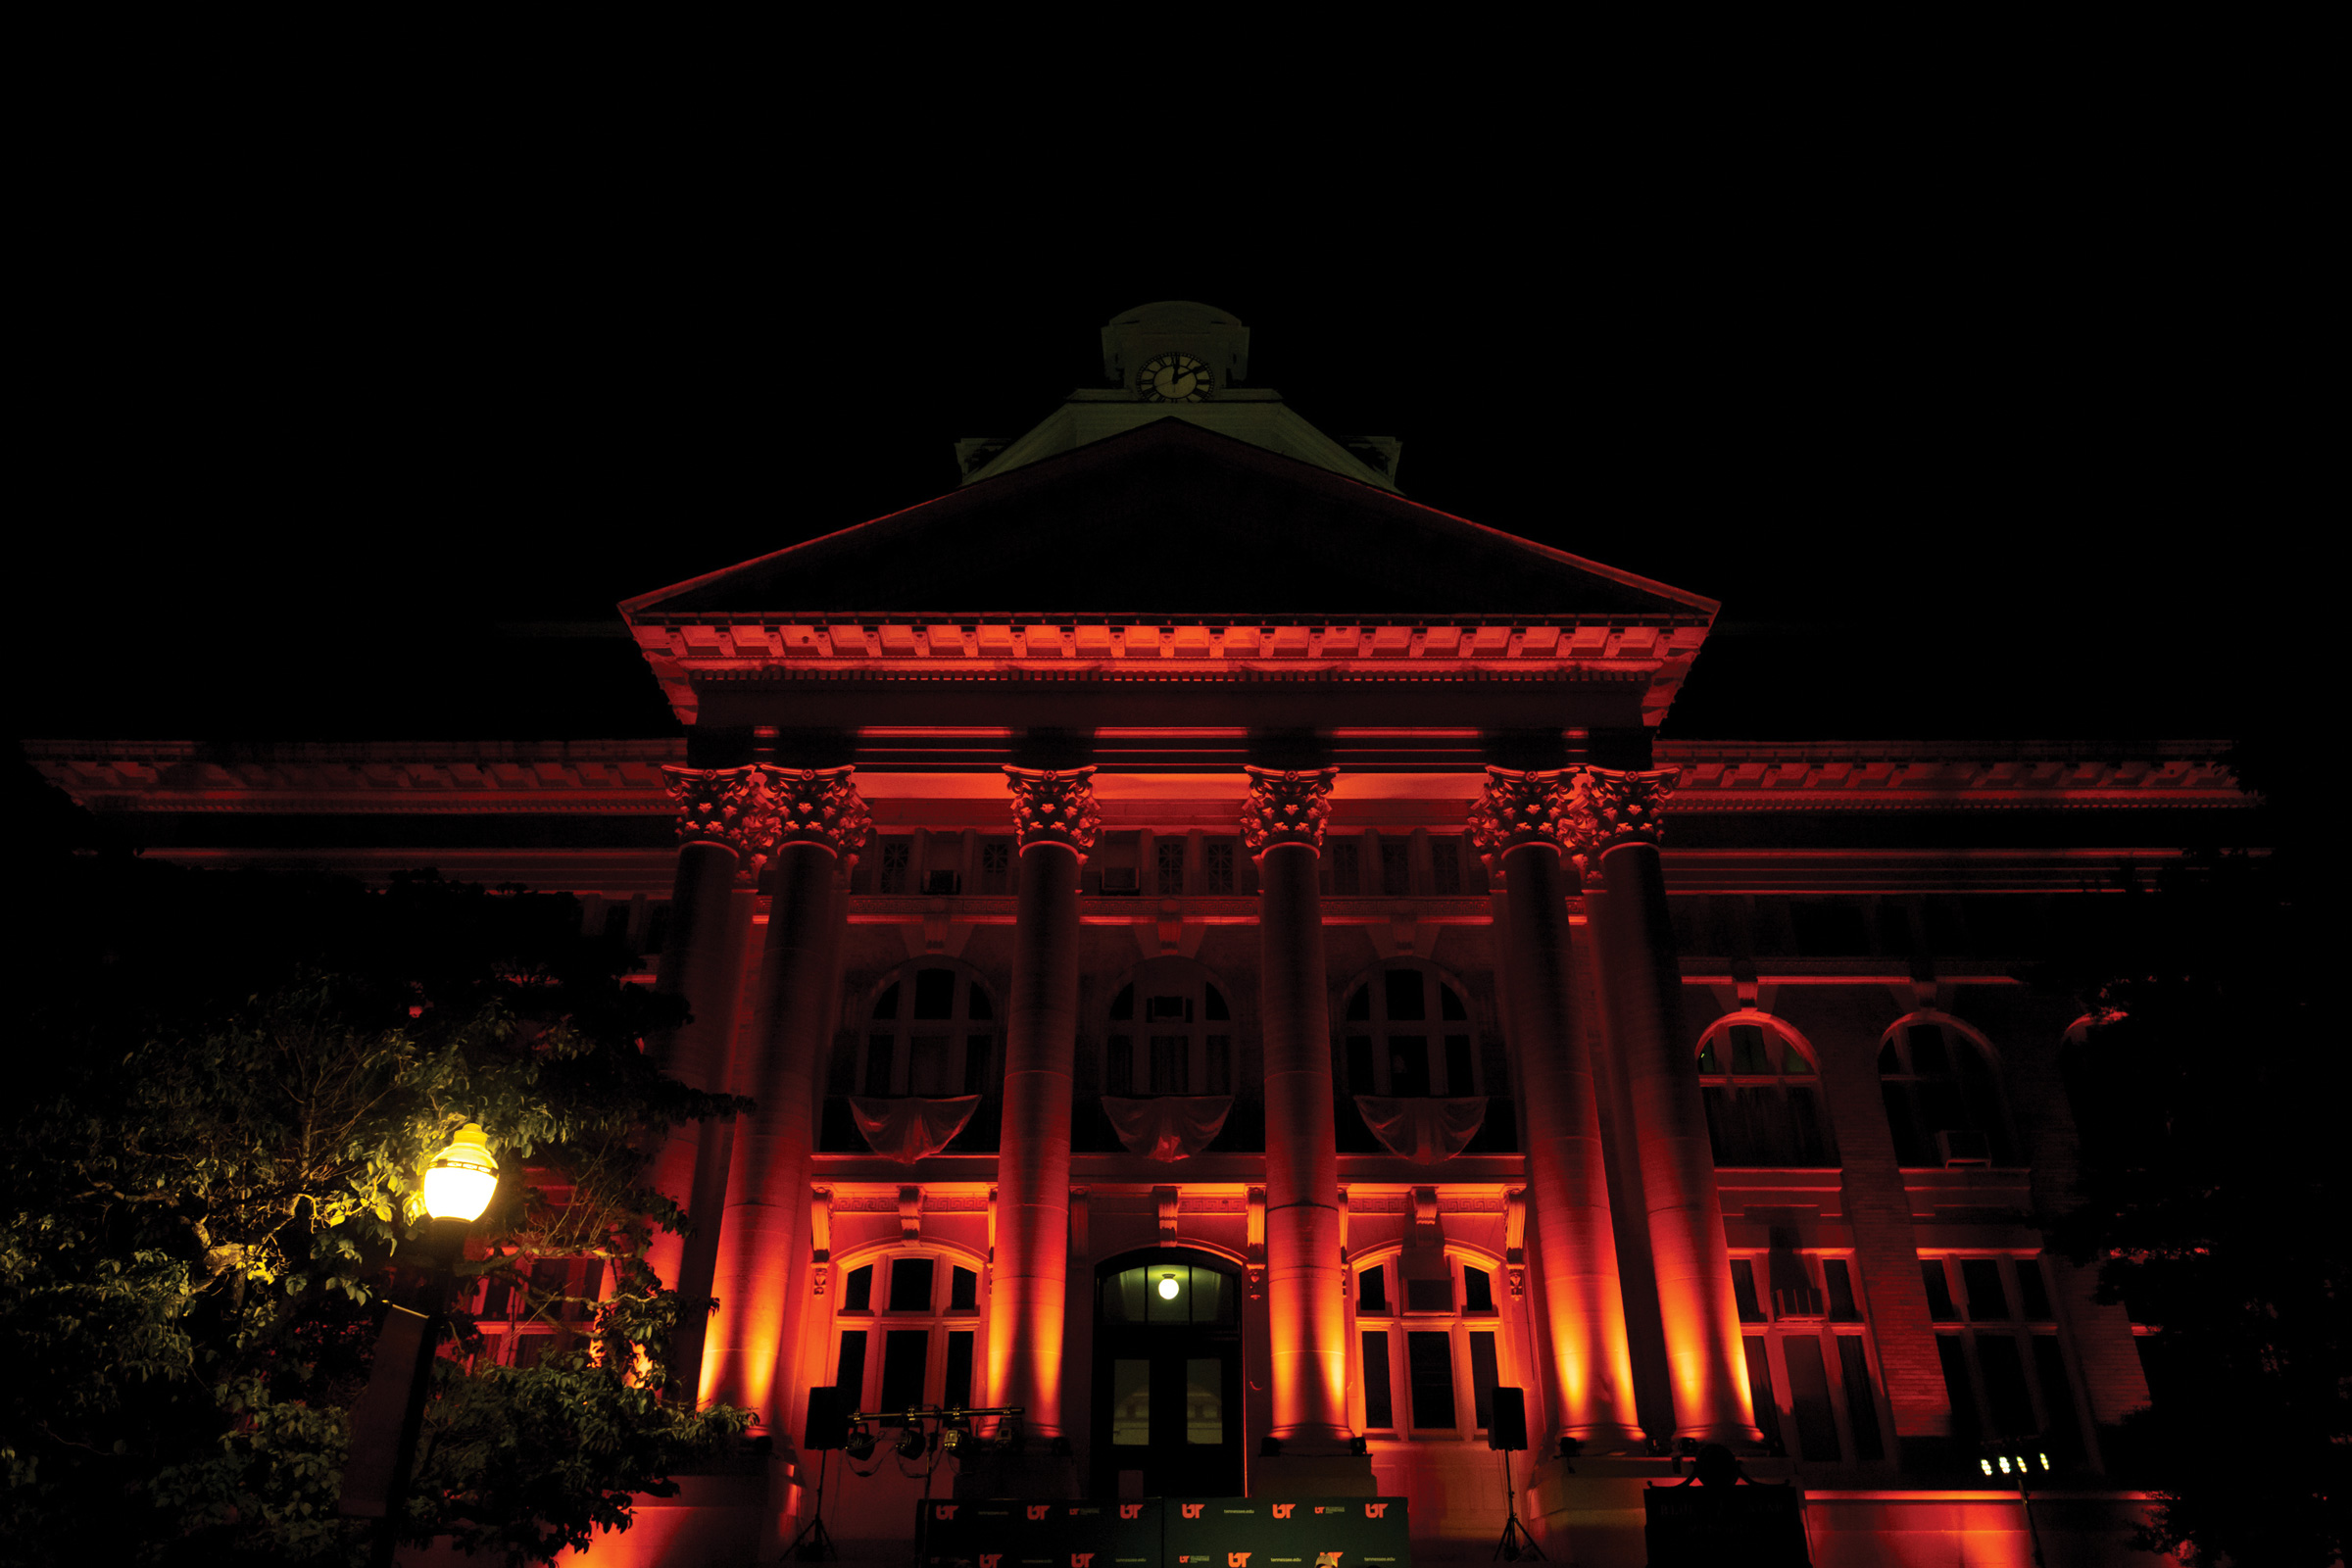 A darkened courthouse illuminated with red and orange lights